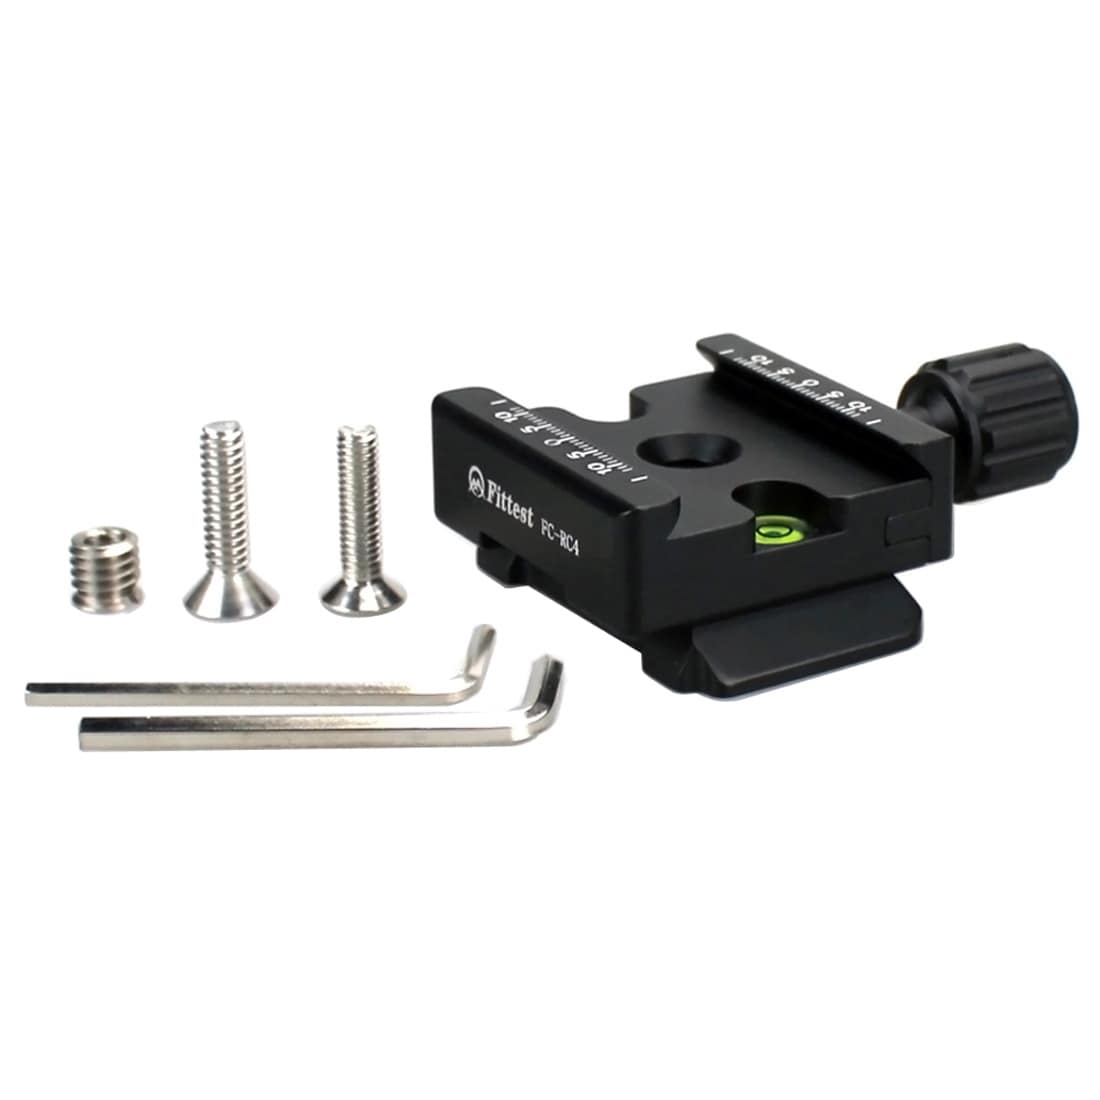 Hurtigbeslag Manfrotto til Akai Type Quick Release Adapterplade